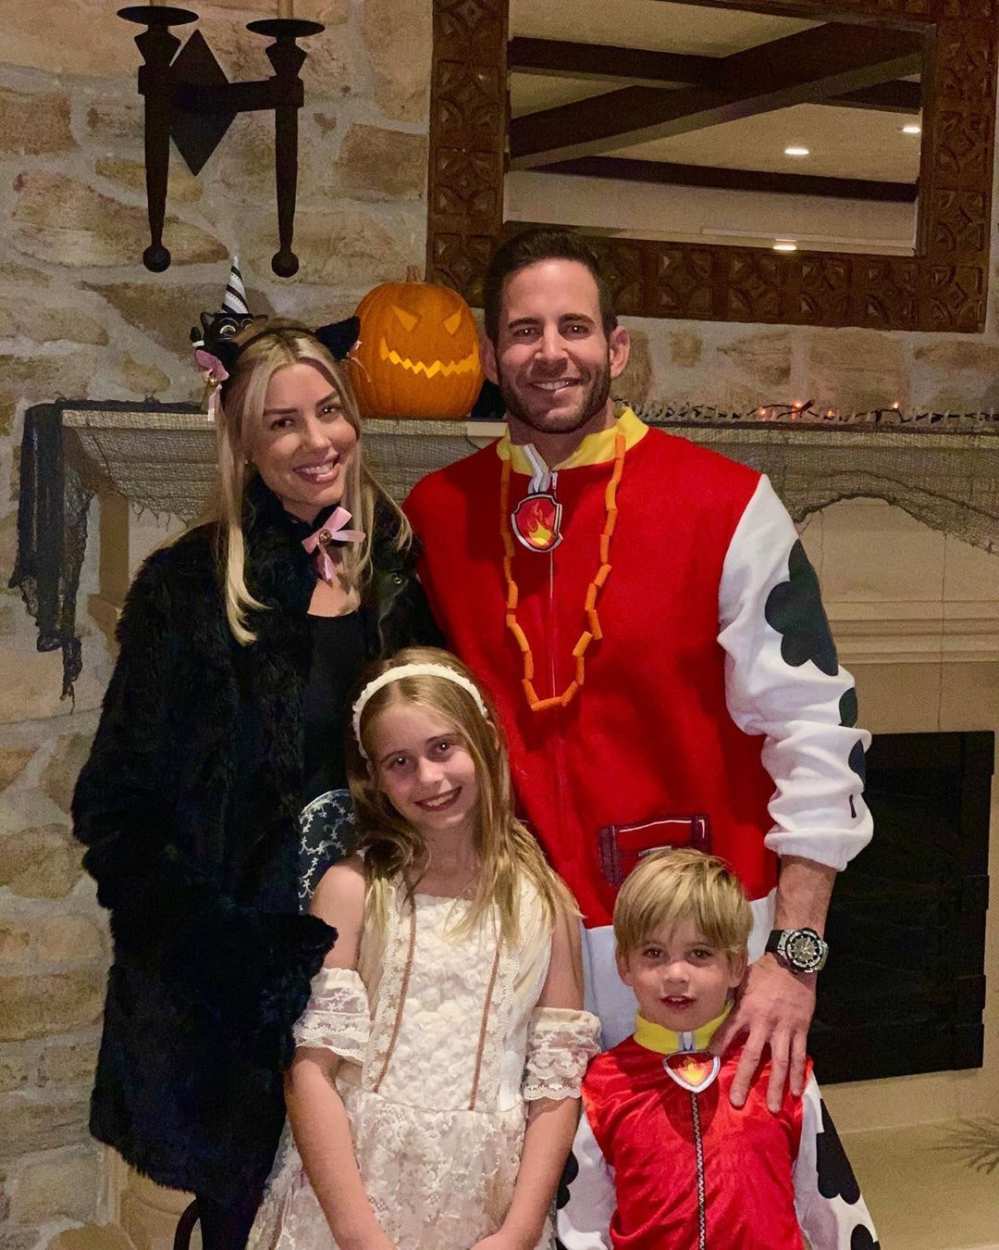 Exes Tarek El Moussa and Christina Anstead Went Trick-or-Treating With Their Kids and New Partners